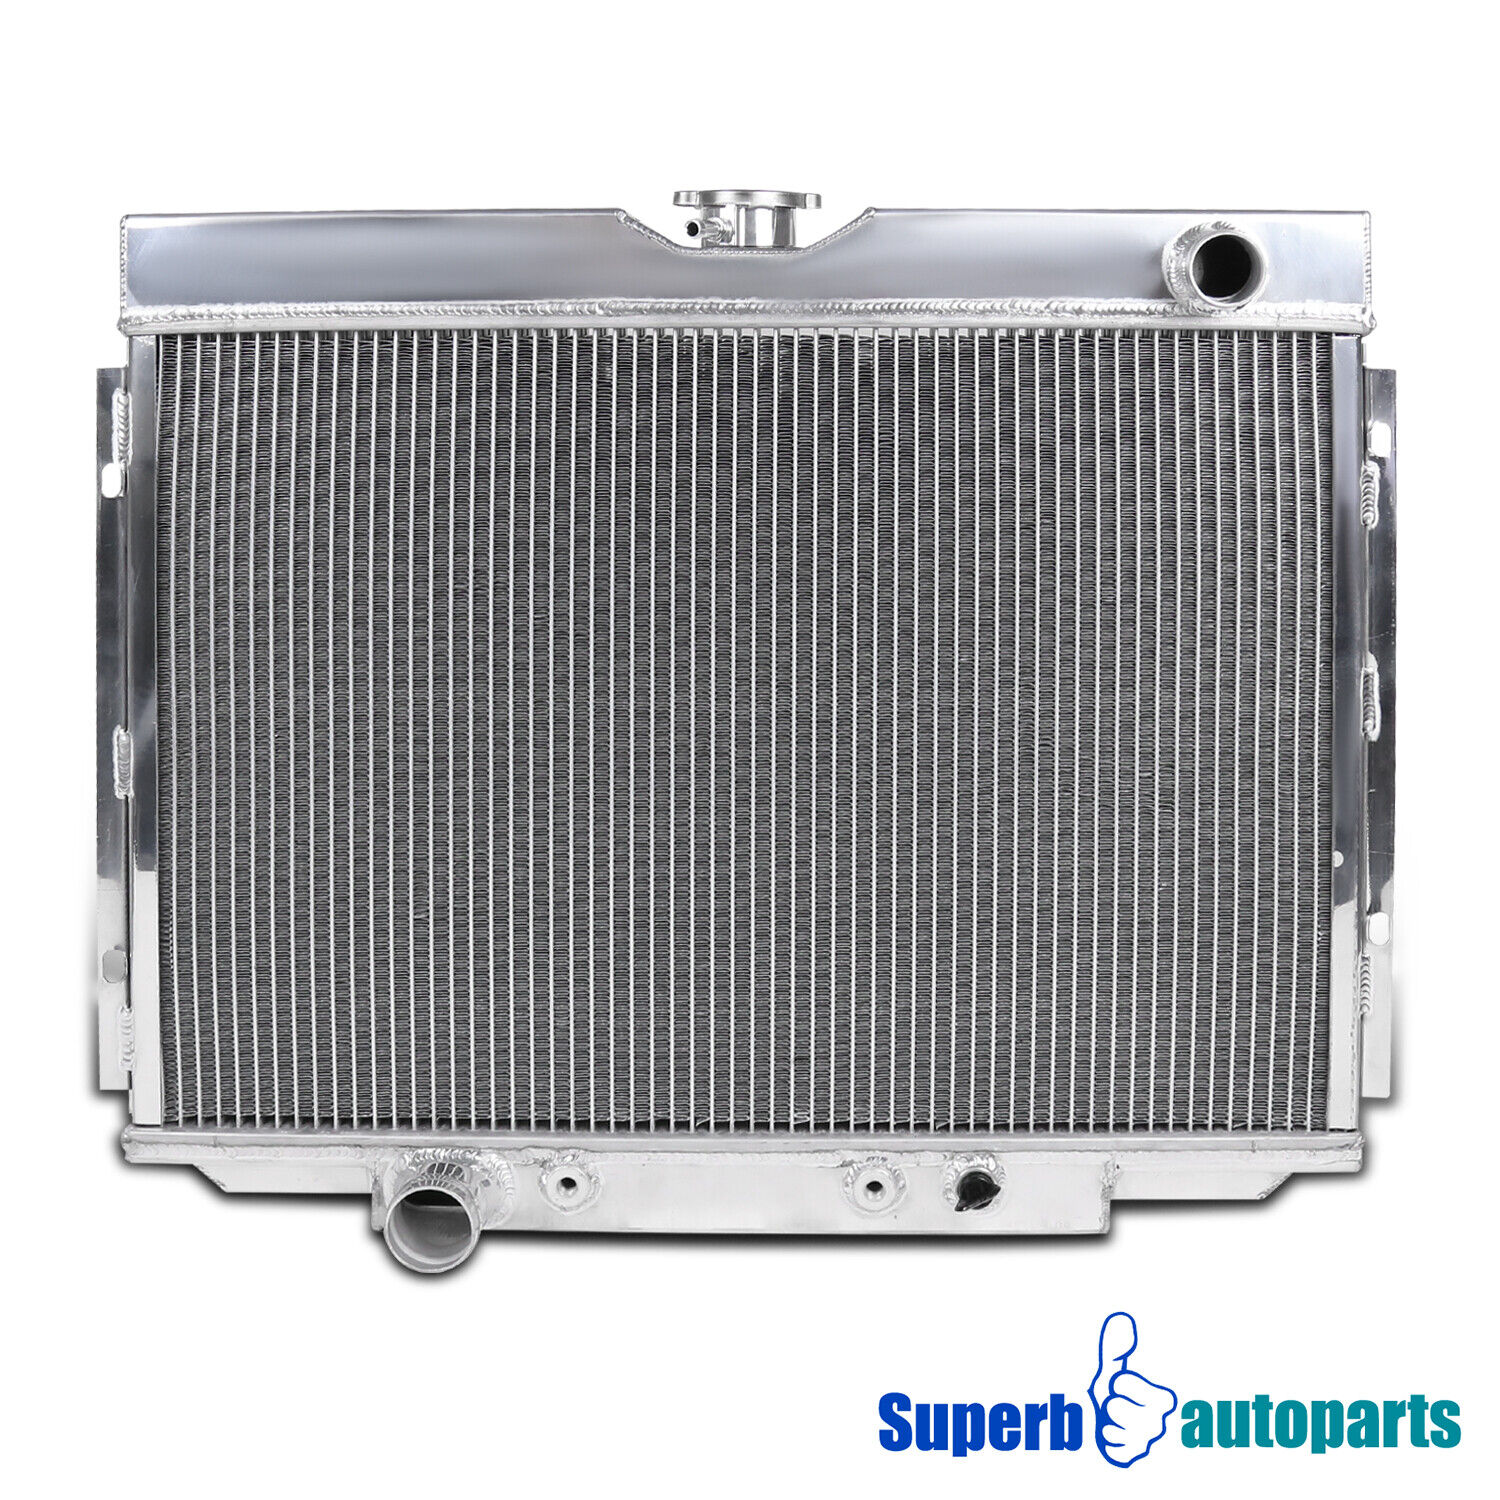 Fits 1967-1970 Ford Mustang Aluminum Radiator V8 3-Row Core MT 24\'\'